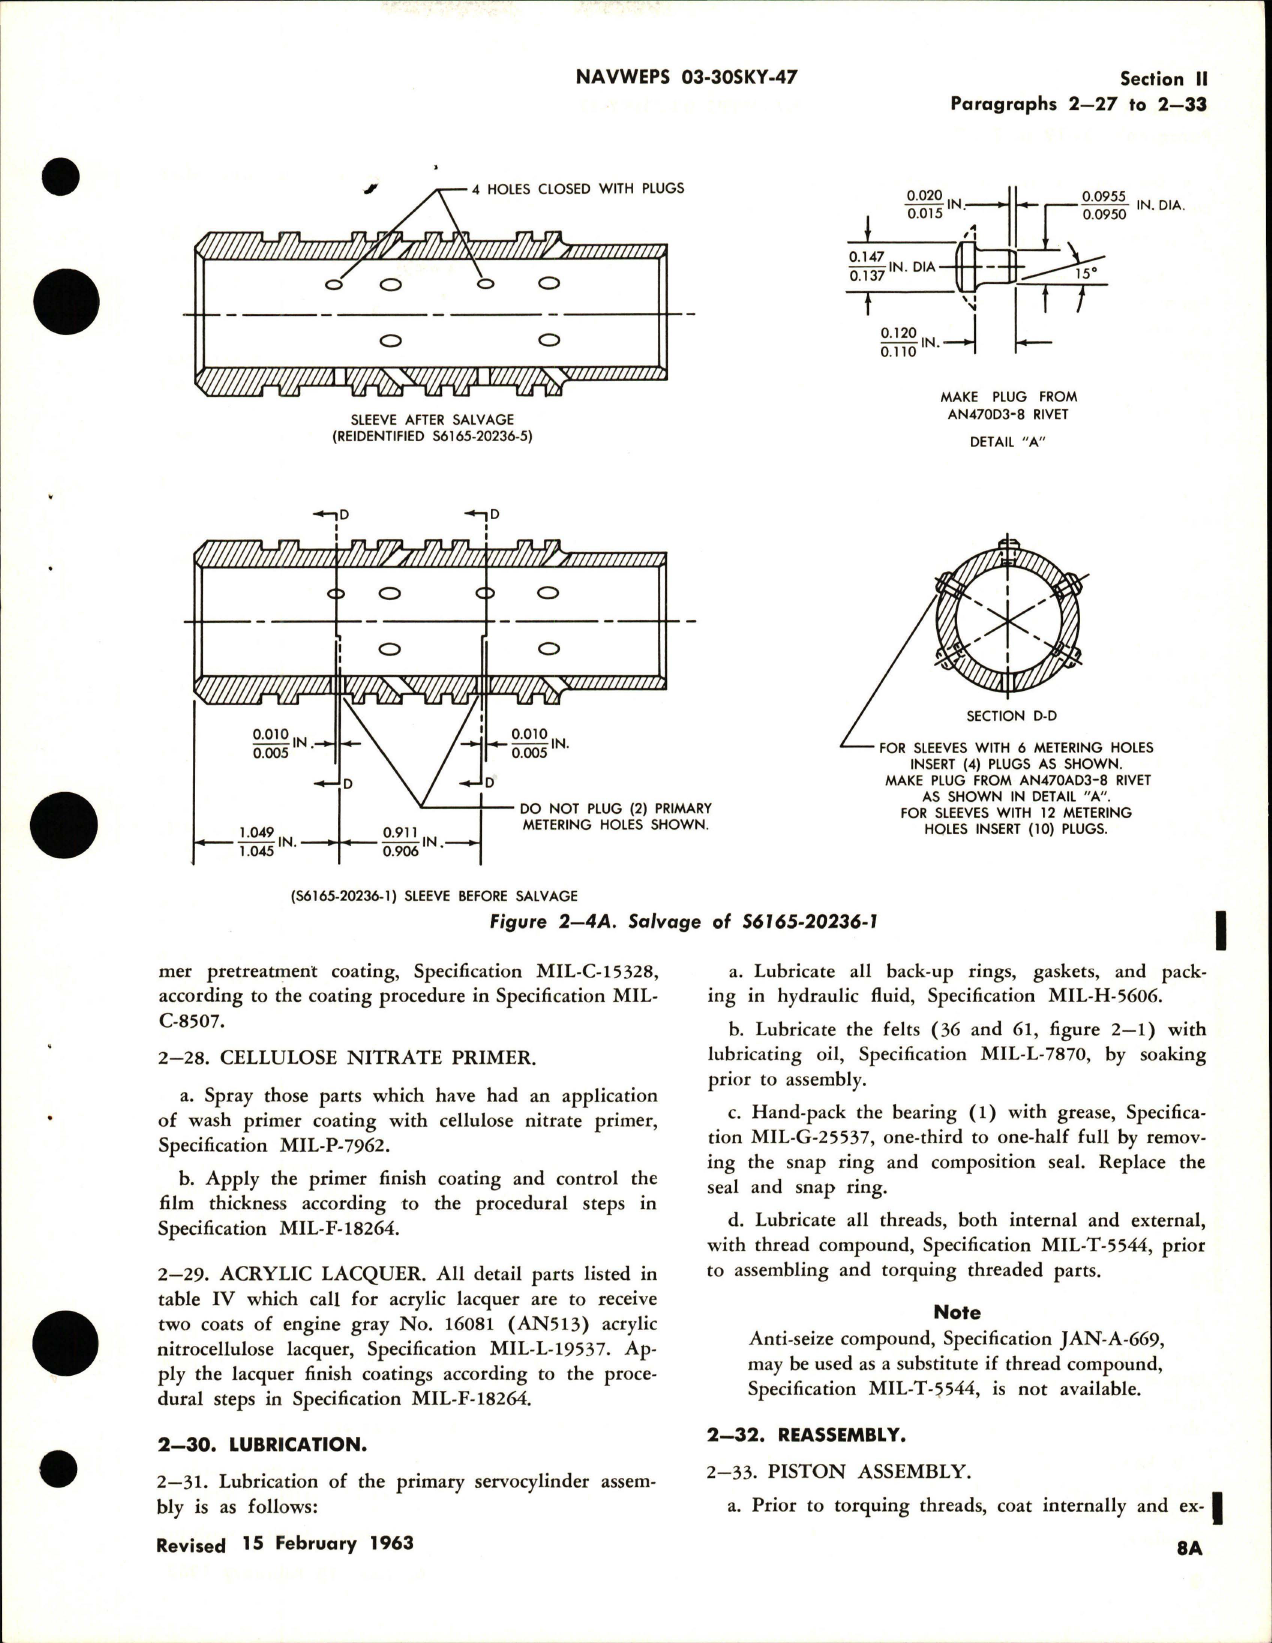 Sample page 5 from AirCorps Library document: Overhaul Instructions for Primary Servocylinder Assembly